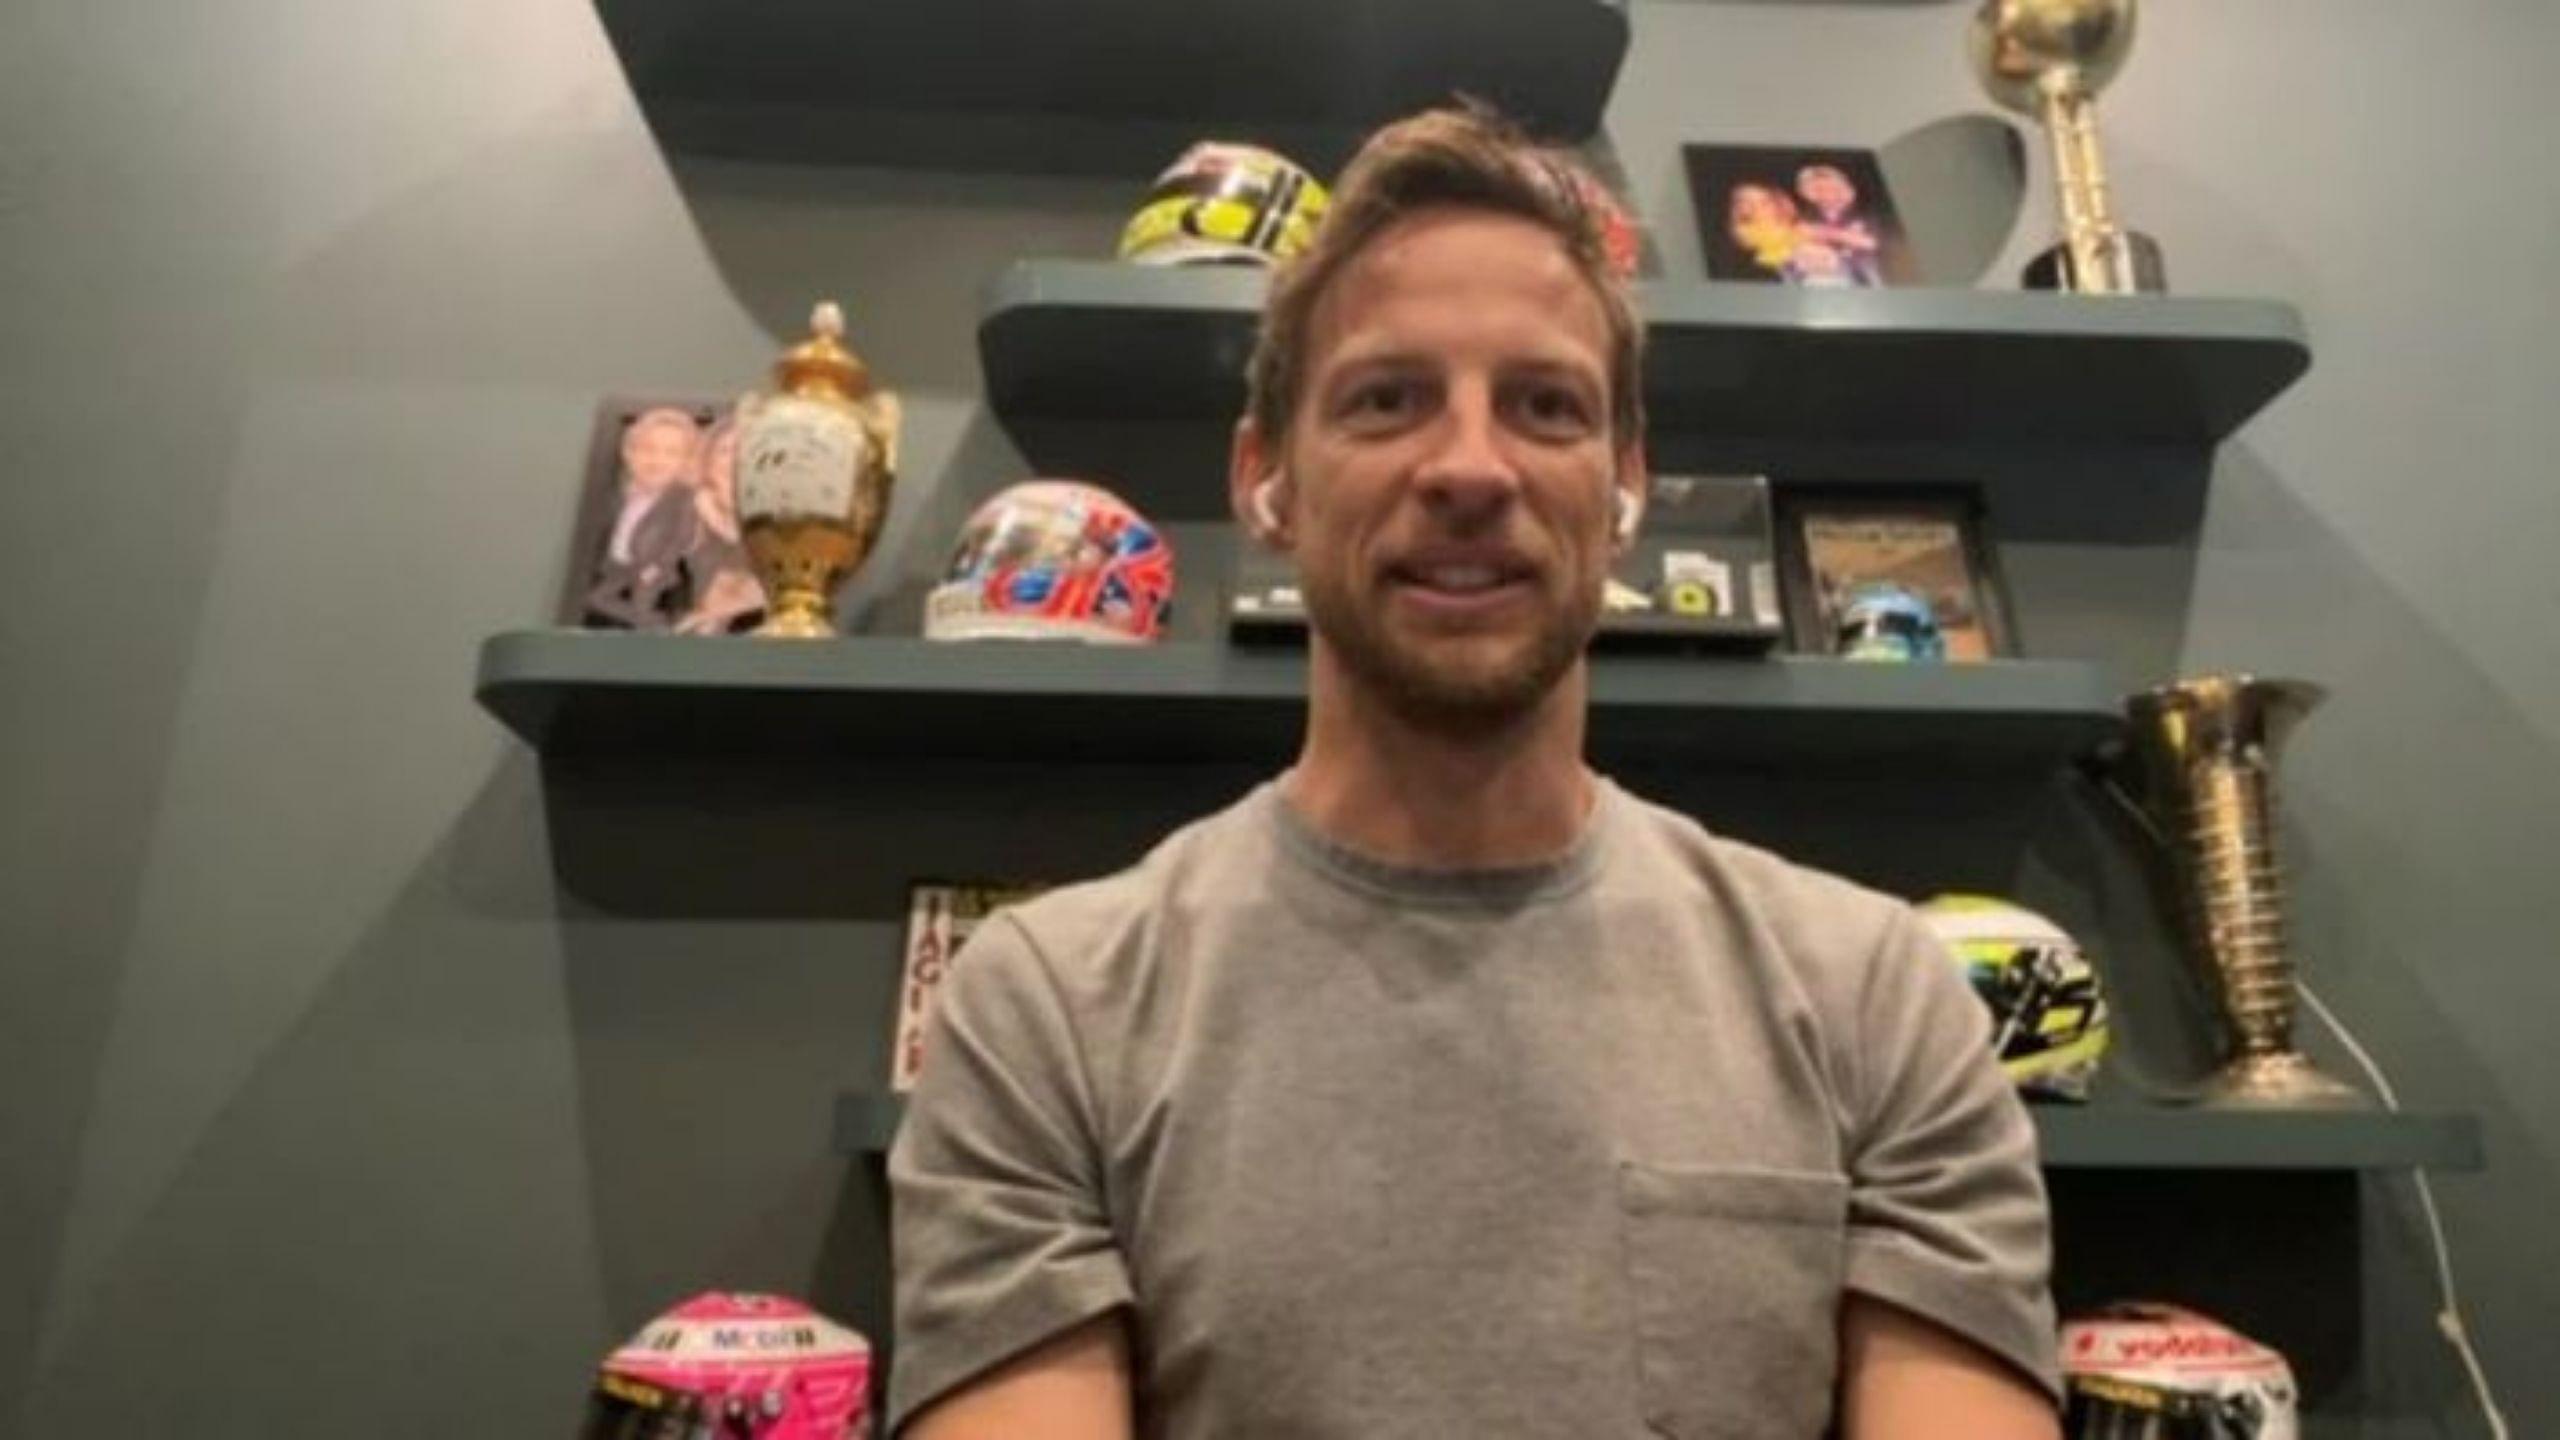 "JBXE has been a long time coming" - Jenson Button announces team for Extreme E Championship